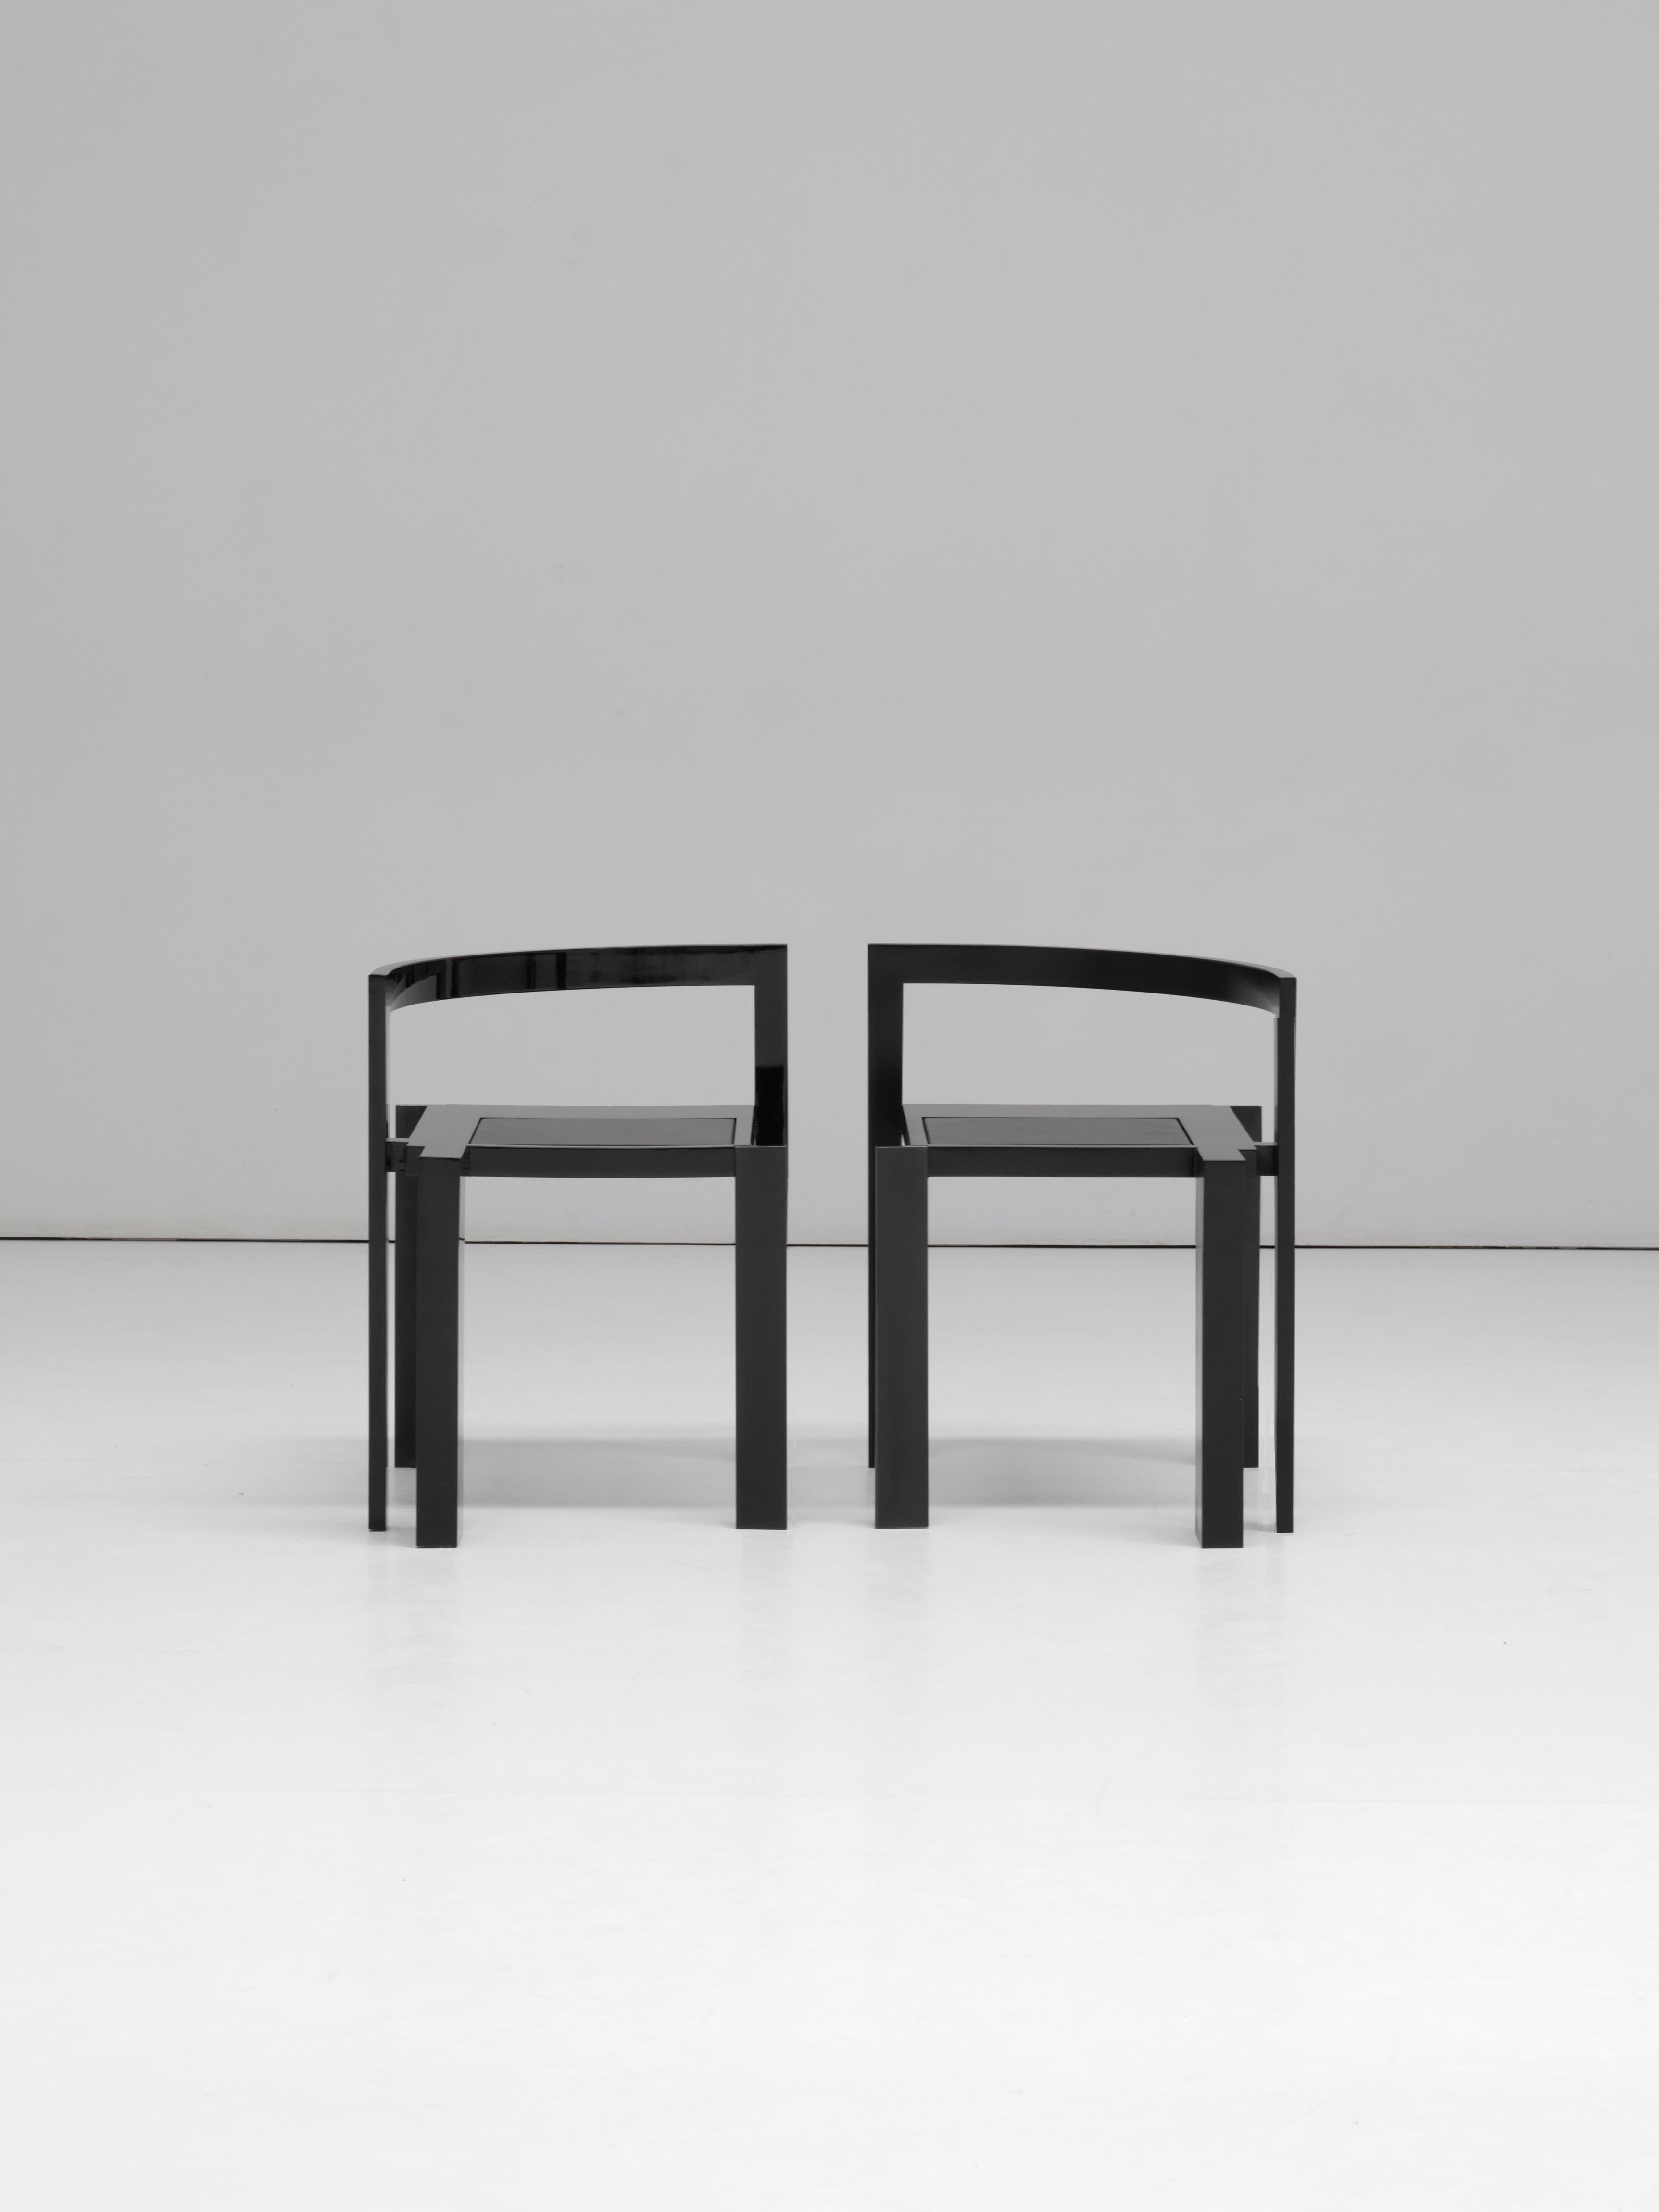 The chair is accommodated by the column. Its form is made up of a composition of intersecting geometries, an incomplete circle curves up from its rectilinear seat and extends outwards to hug the column. The five legs are of changing thickness, three